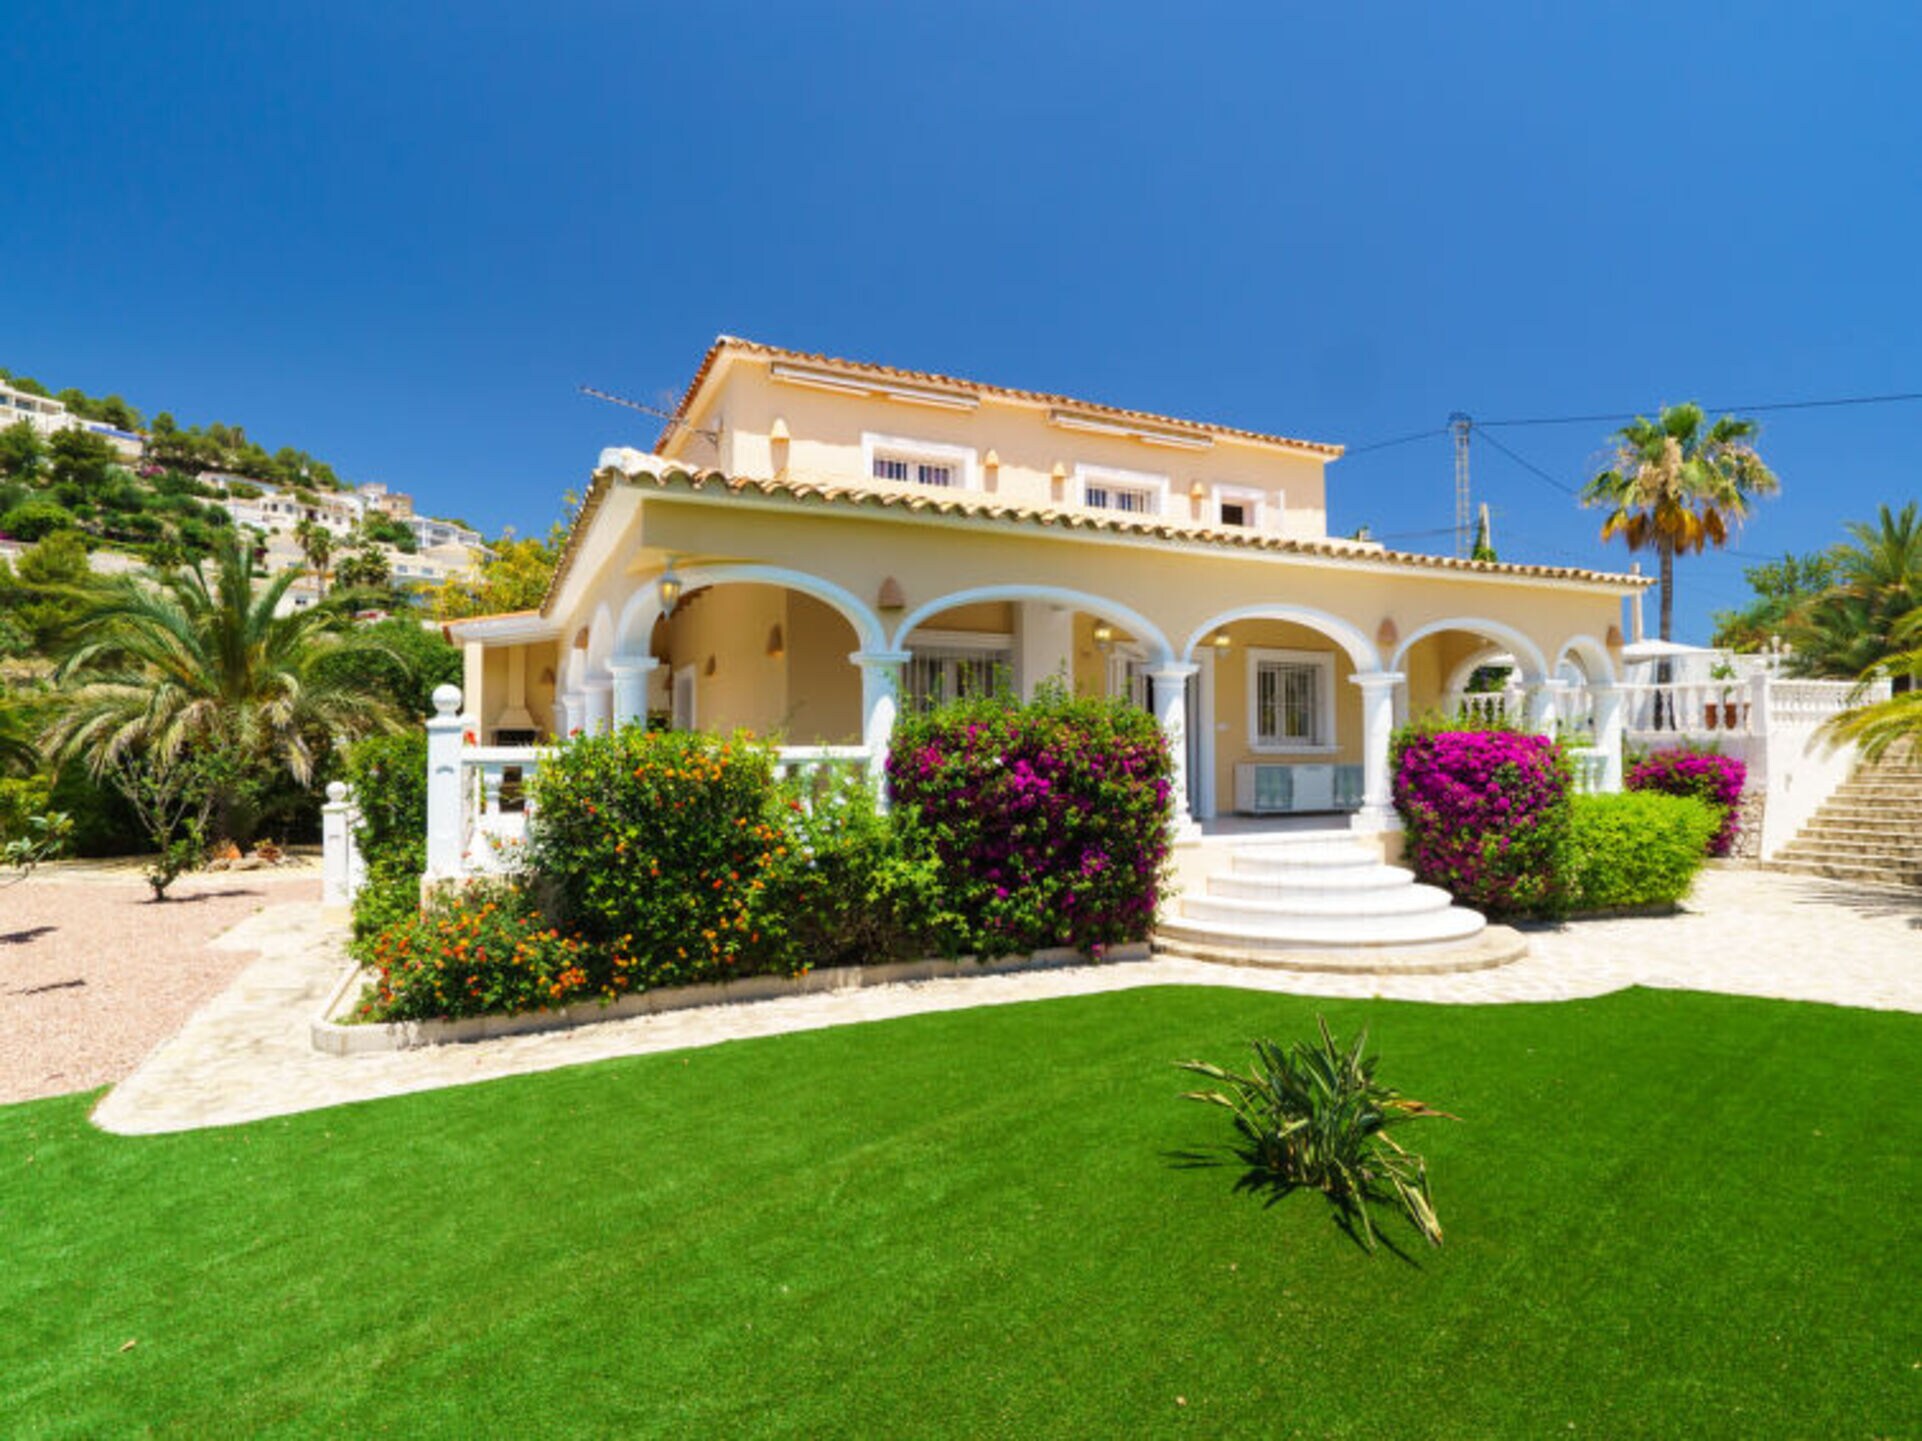 Property Image 1 - Property Manager Villa with First Class Amenities, Costa Blanca Villa 1011